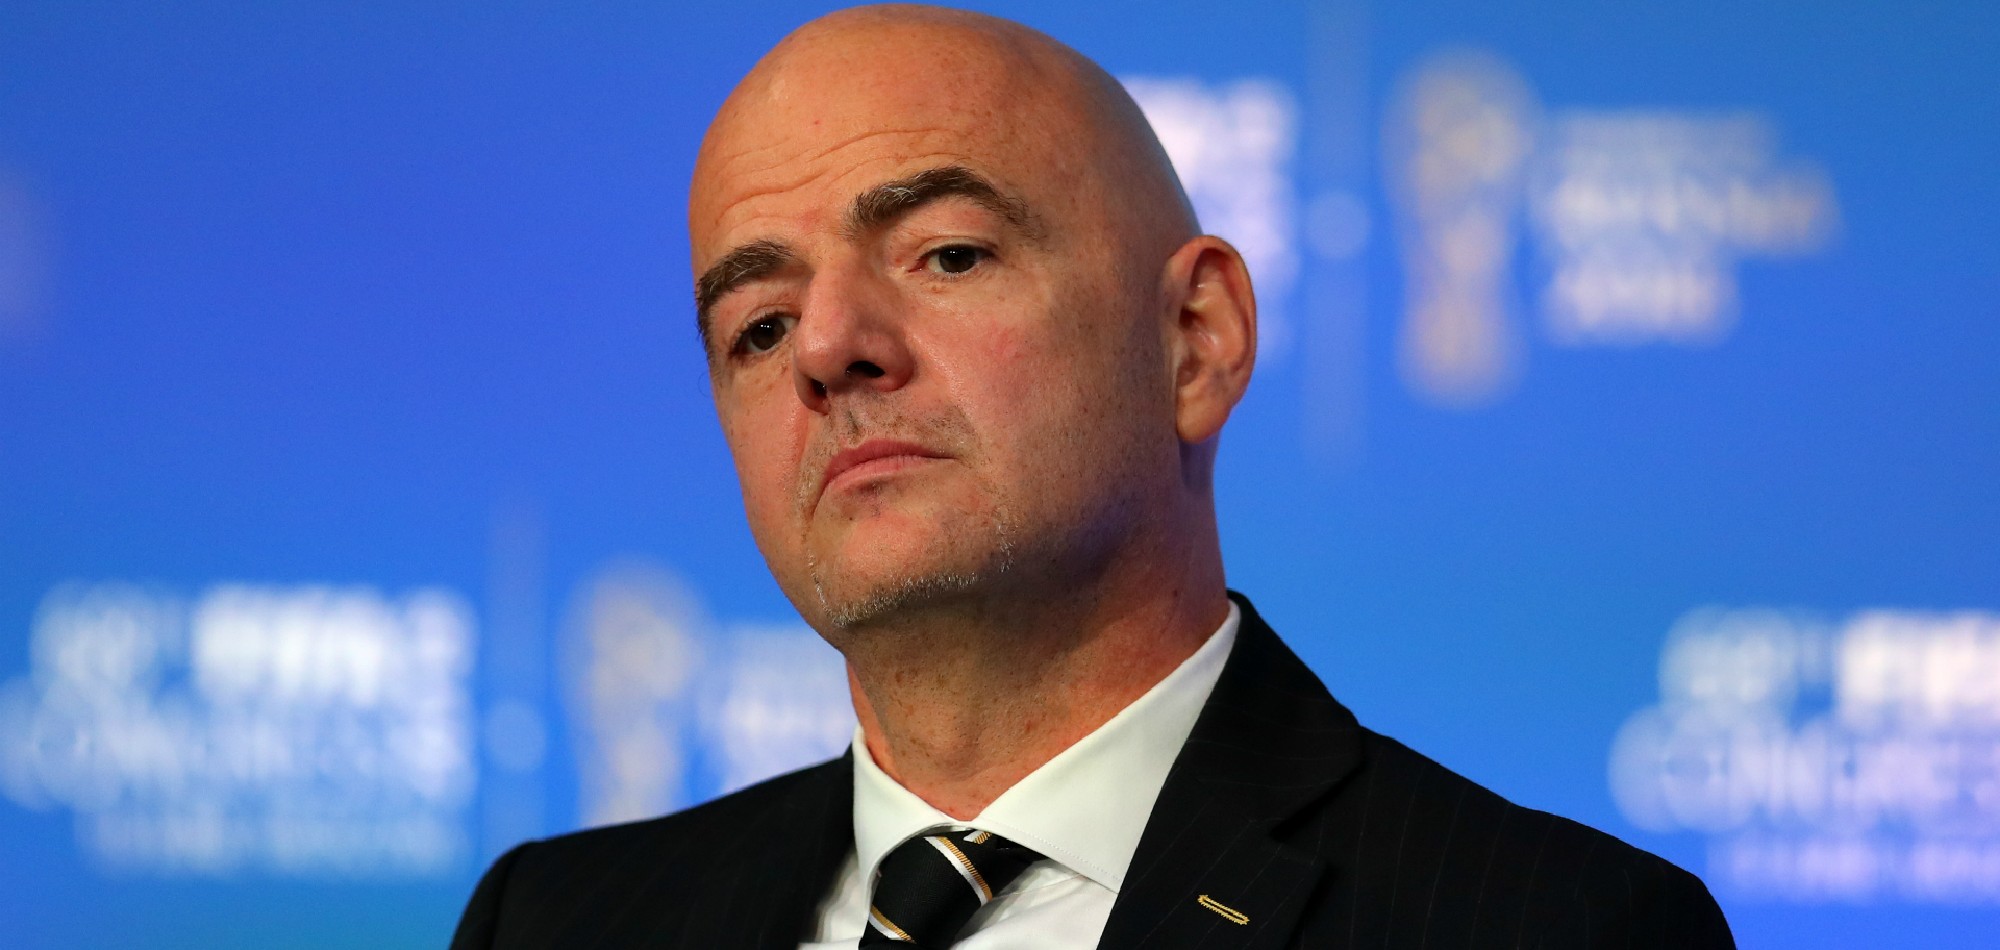 Result of Brazil-Argentina Match Must Be Decided on Pitch, says Infantino